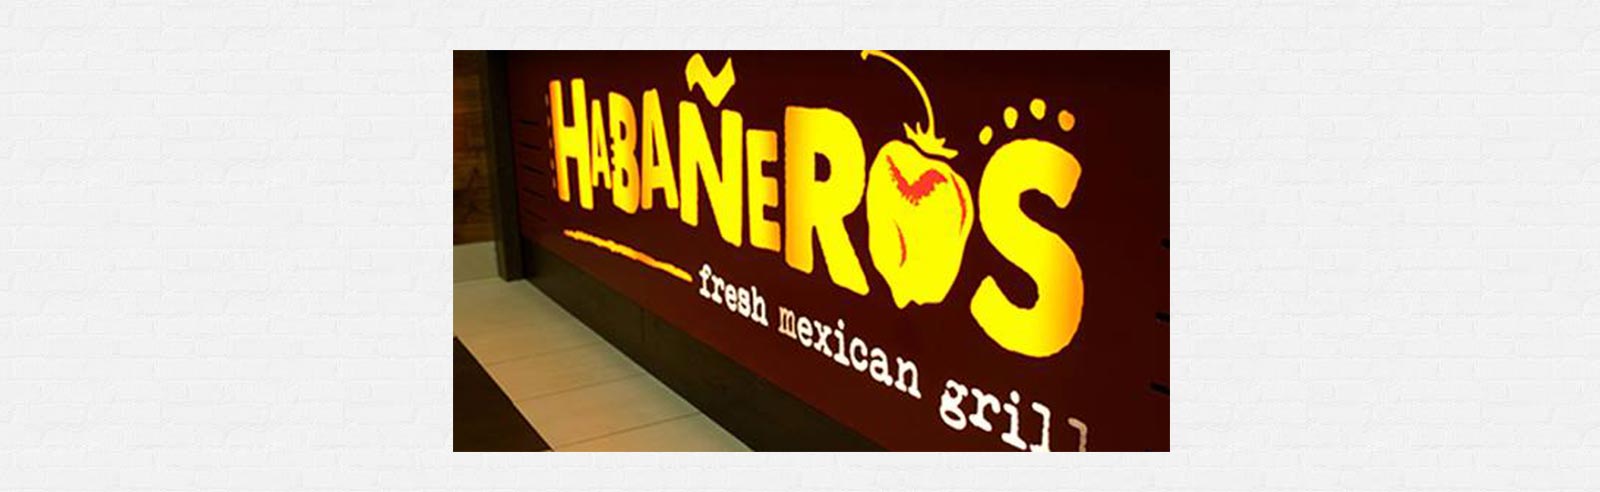 Habaneros Food Review